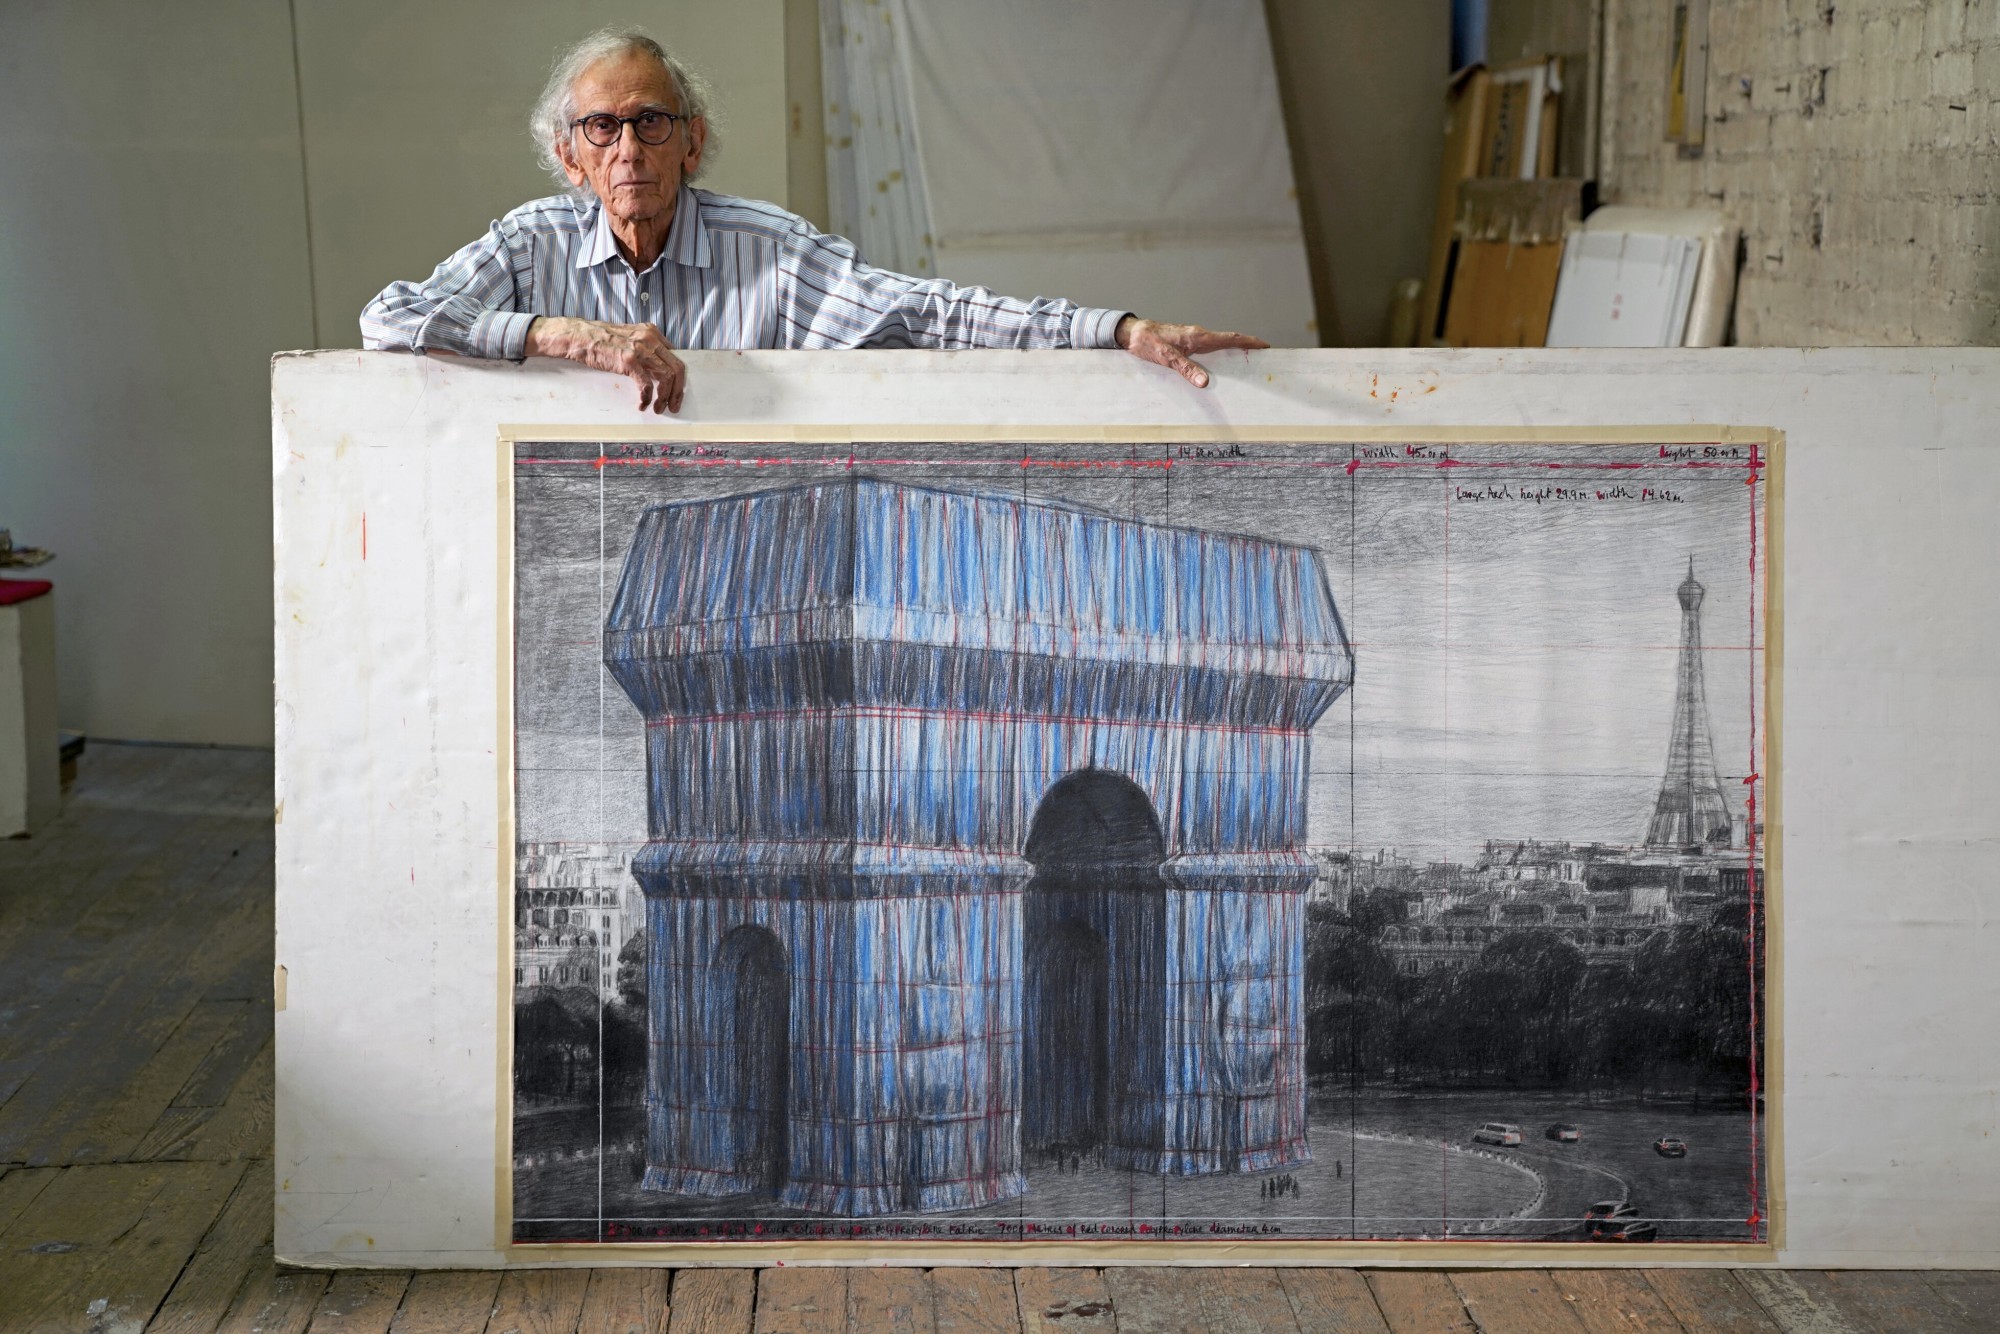 Christo in his studio with a preparatory drawing for L’Arc de Triomphe, Wrapped. Wolfgang Volz © 2019 Christo and Jeanne-Claude Foundation title=